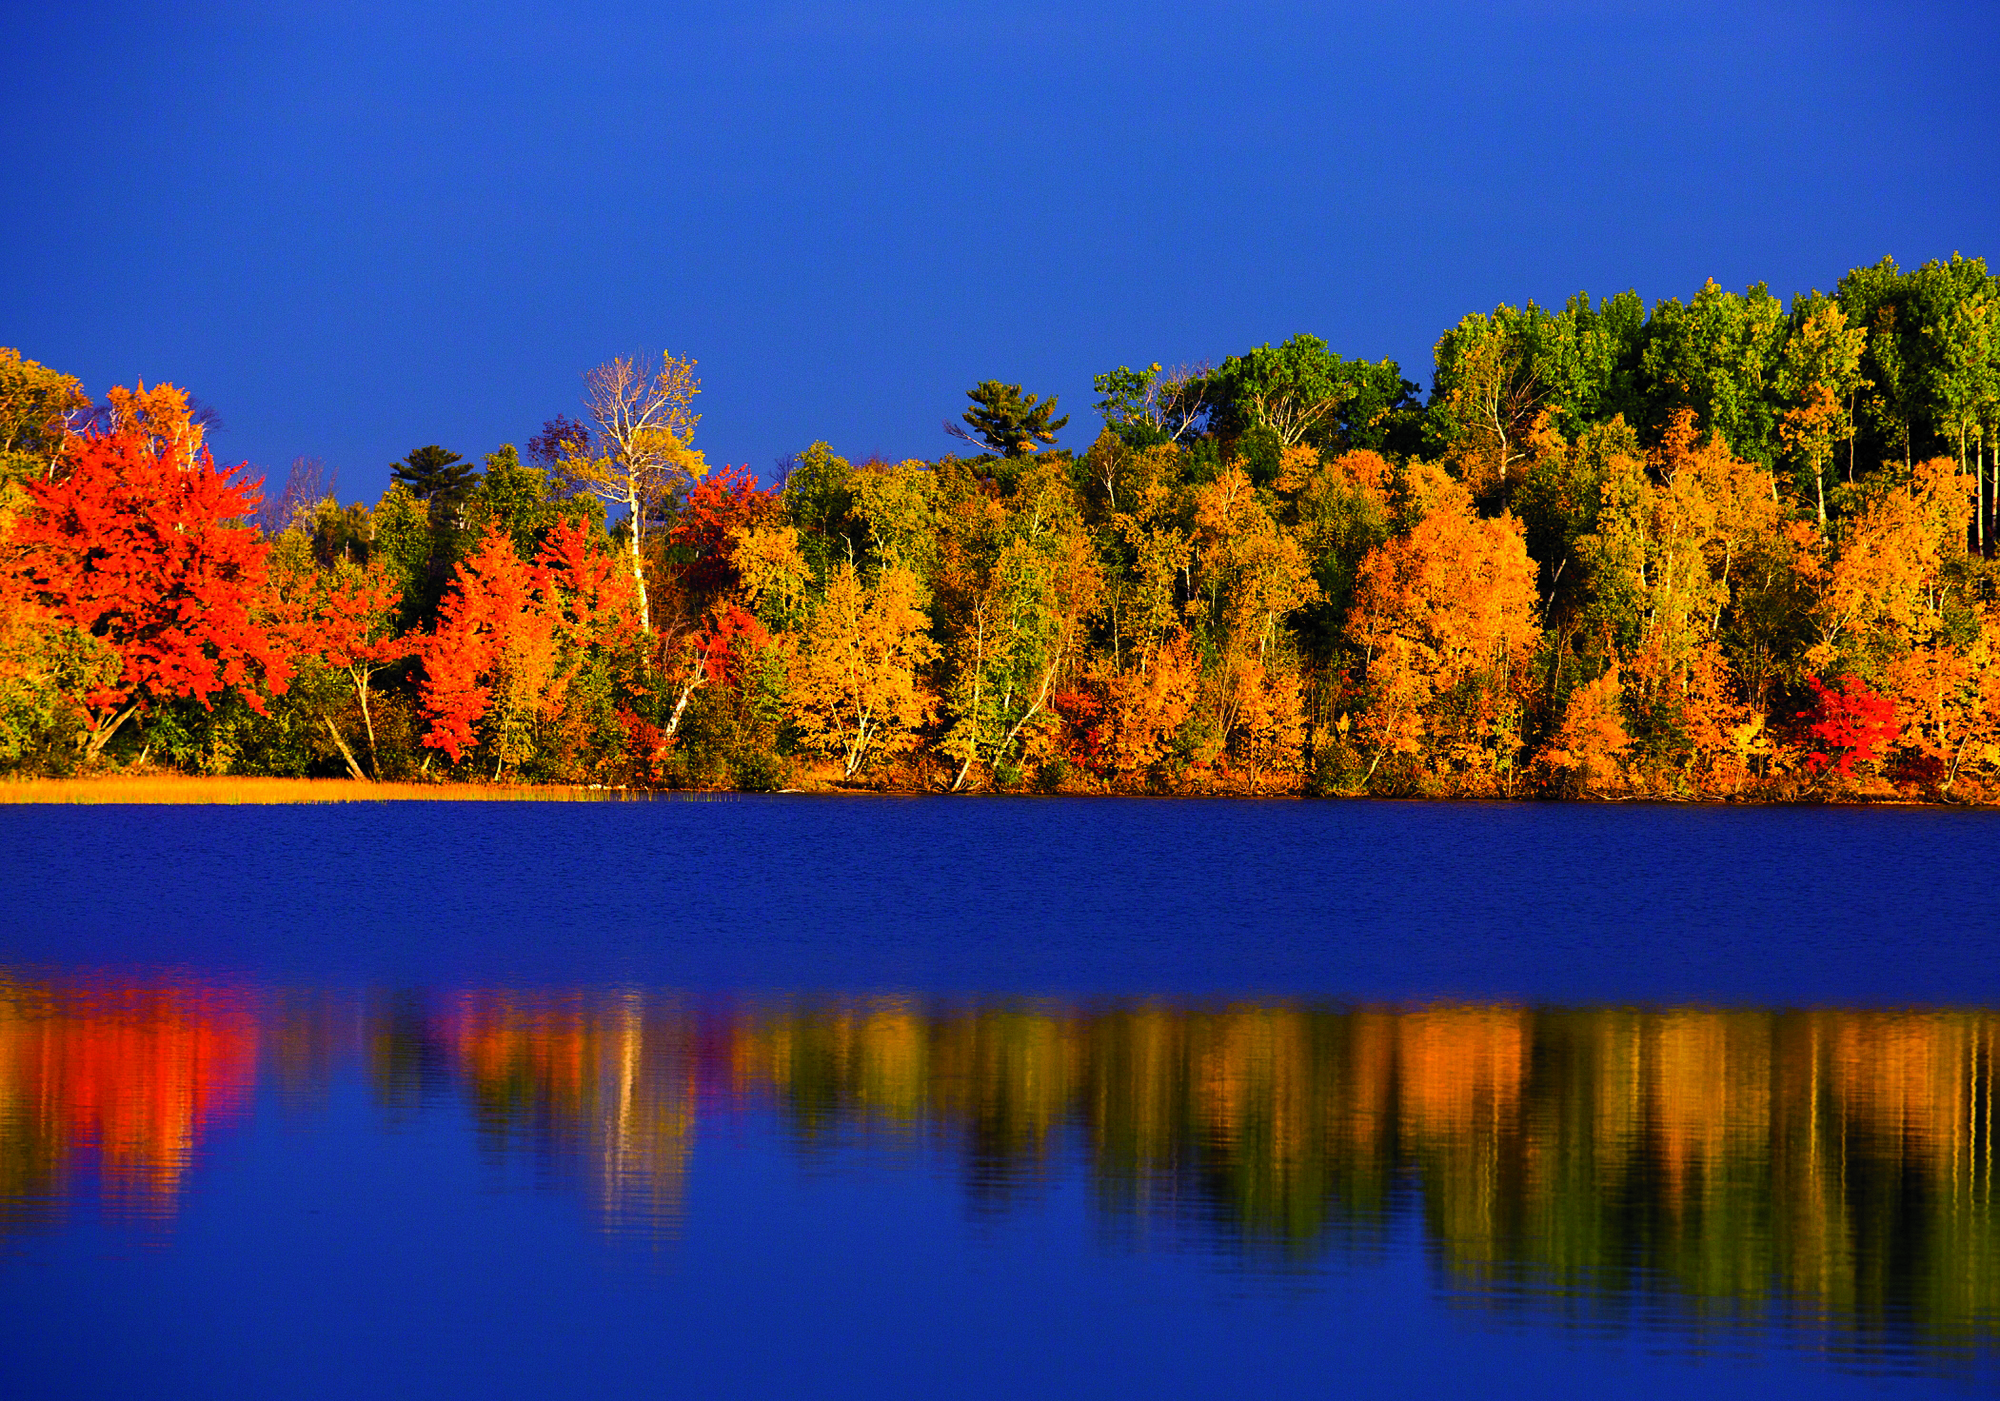 The color of the leaves around Lake Superior is at peak brightness early in morning.